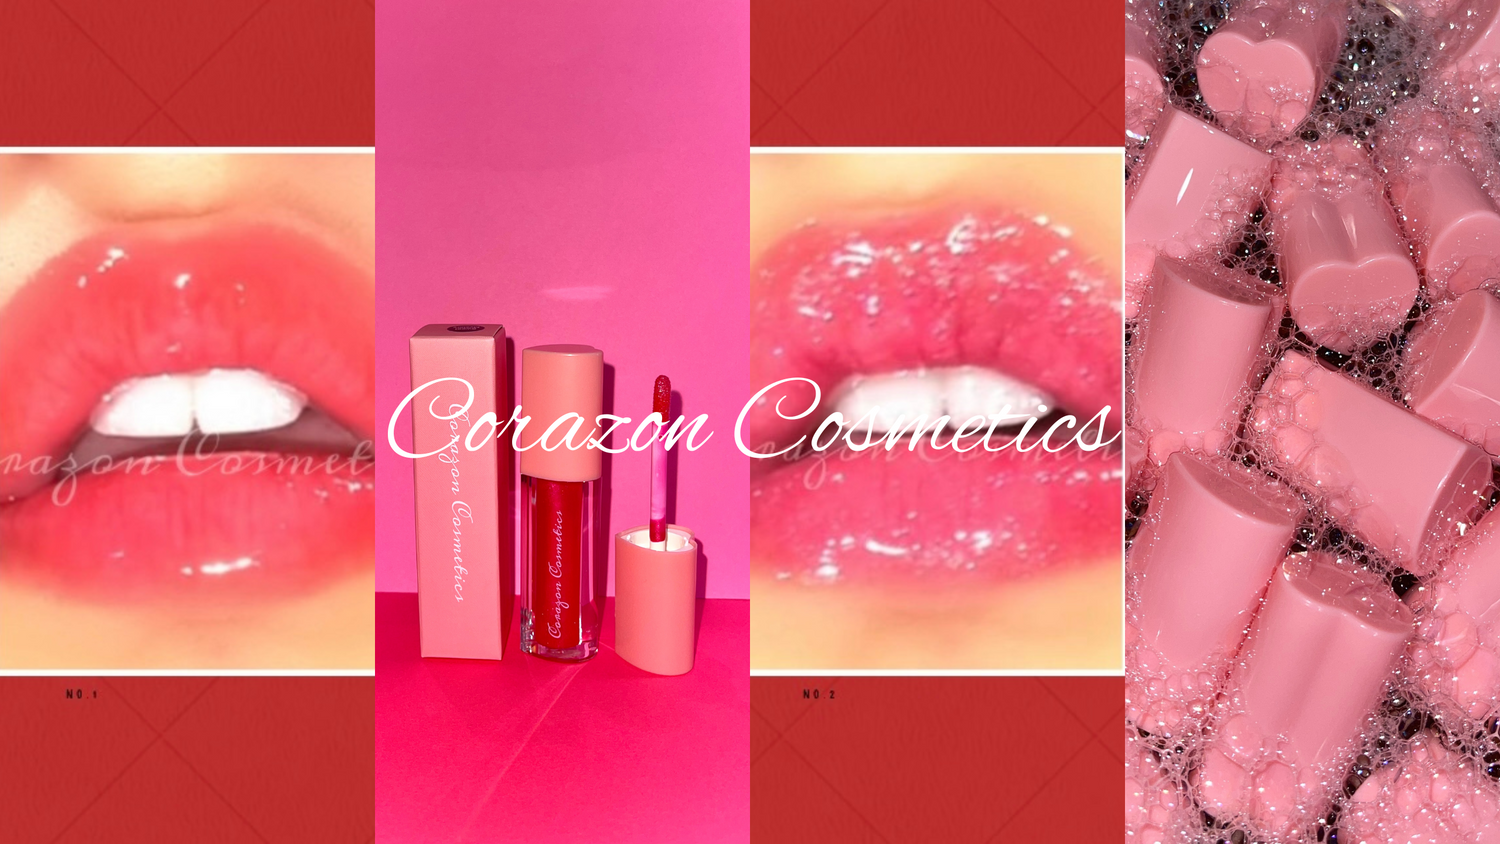 CorazonCosmetics.Net banner, soft luscious silky smooth lips coming from Corazon Cosmetics shades Lovely and Sweet Mystery, CorazonCos lipglosses are cleaned and sanitized before shipped to customer! corazon cos is Vegan and cruelty free  